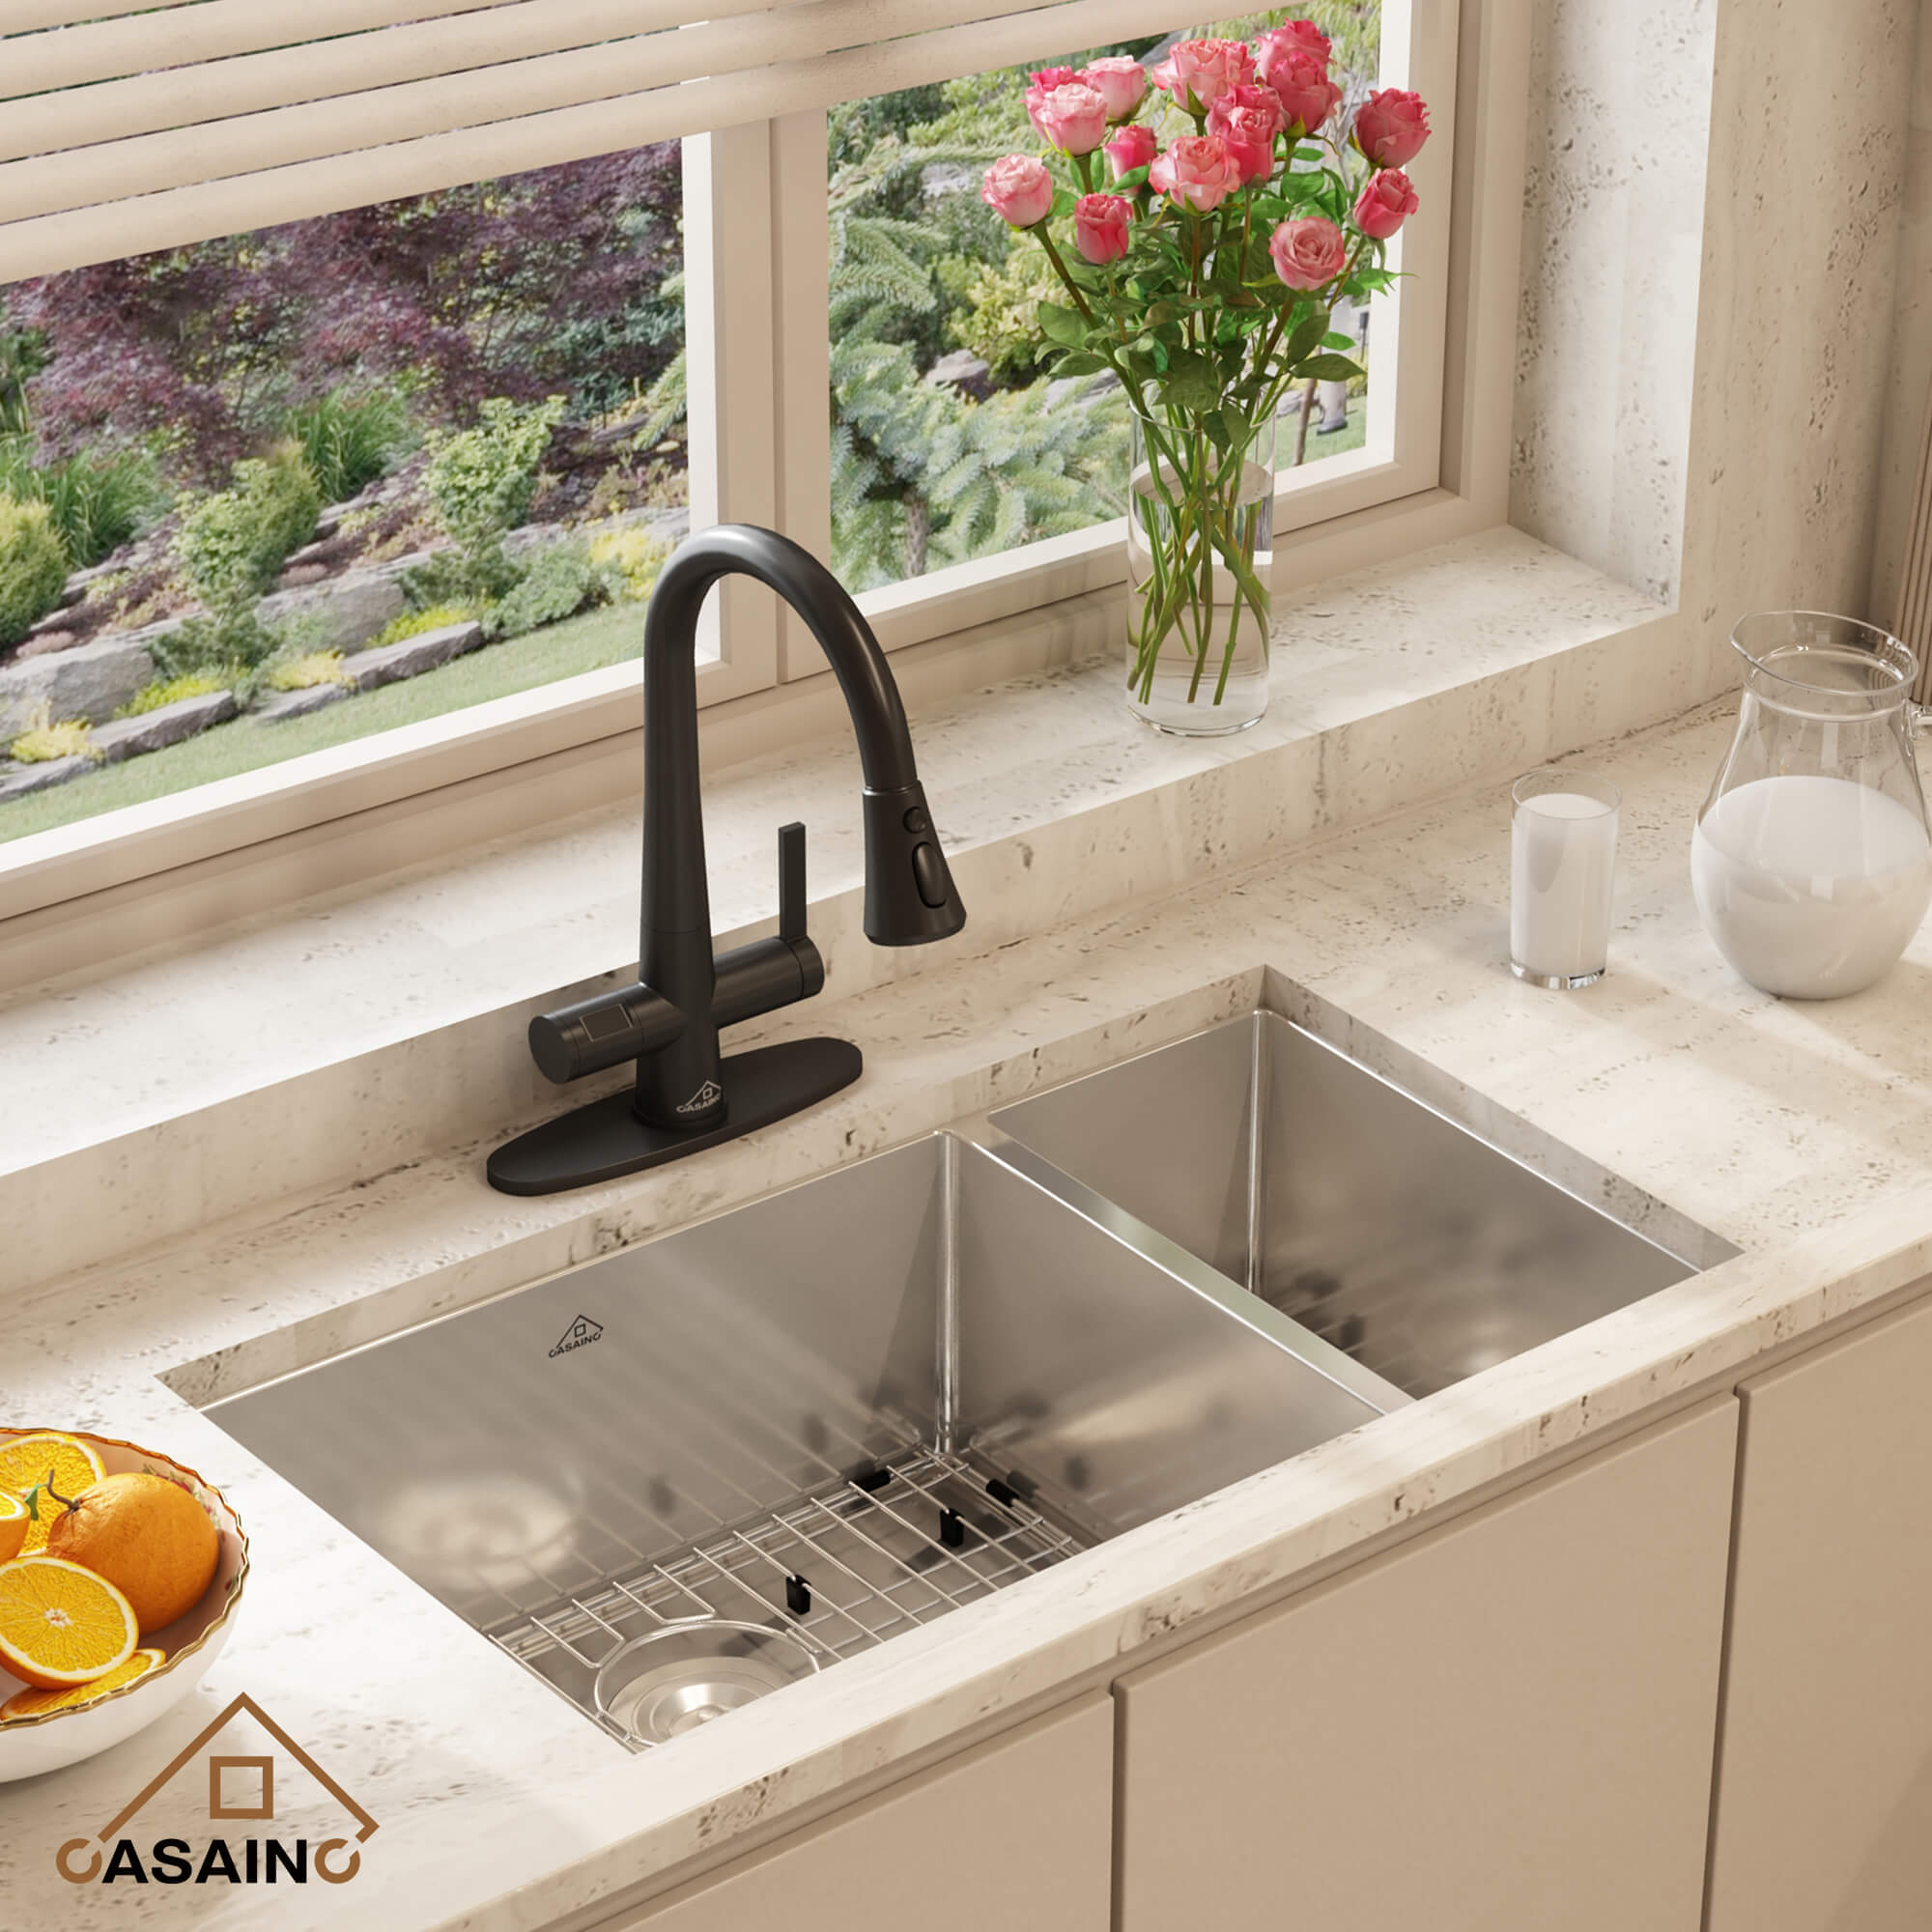 32" Premium Multi-Functional 304 Stainless Steel Design Kitchen Sink , Efficient Double Sink Design with Practical Accessories for Enduring Durability, Silent Operation 